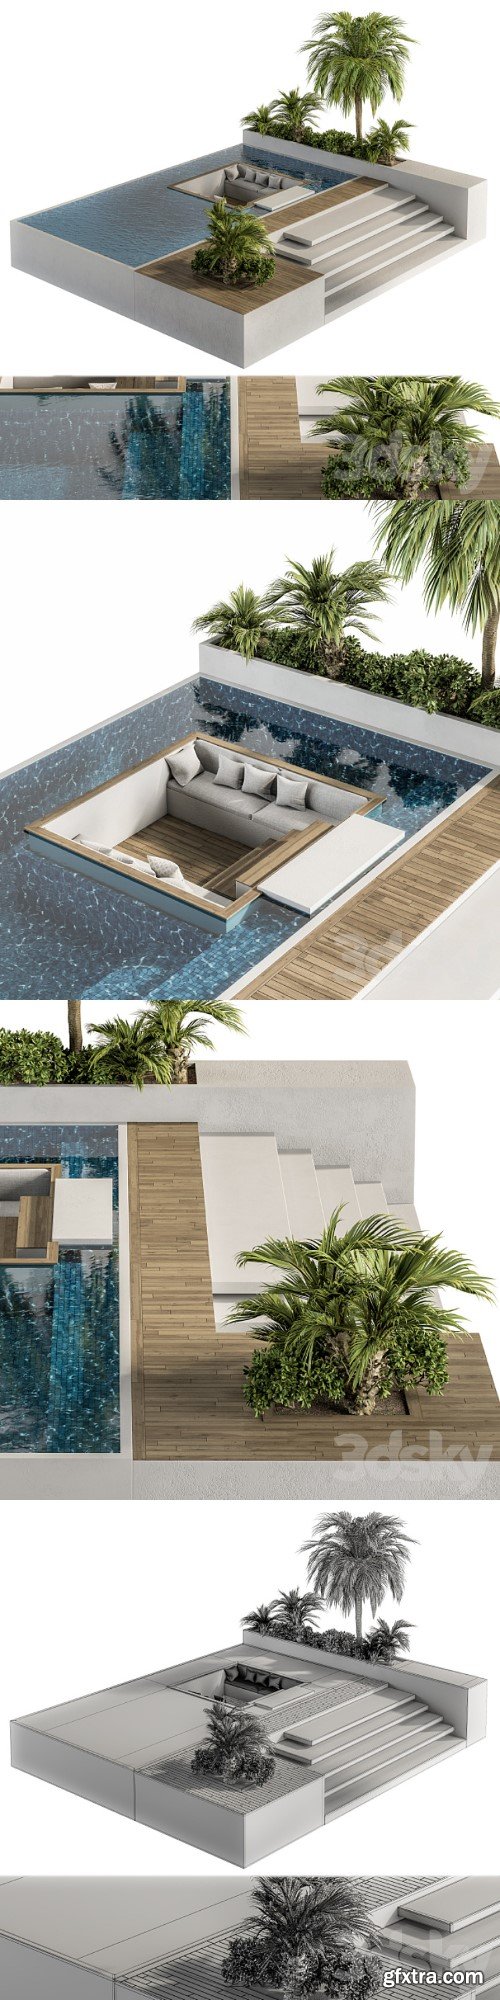 Backyard and Landscape Furniture with Pool 02